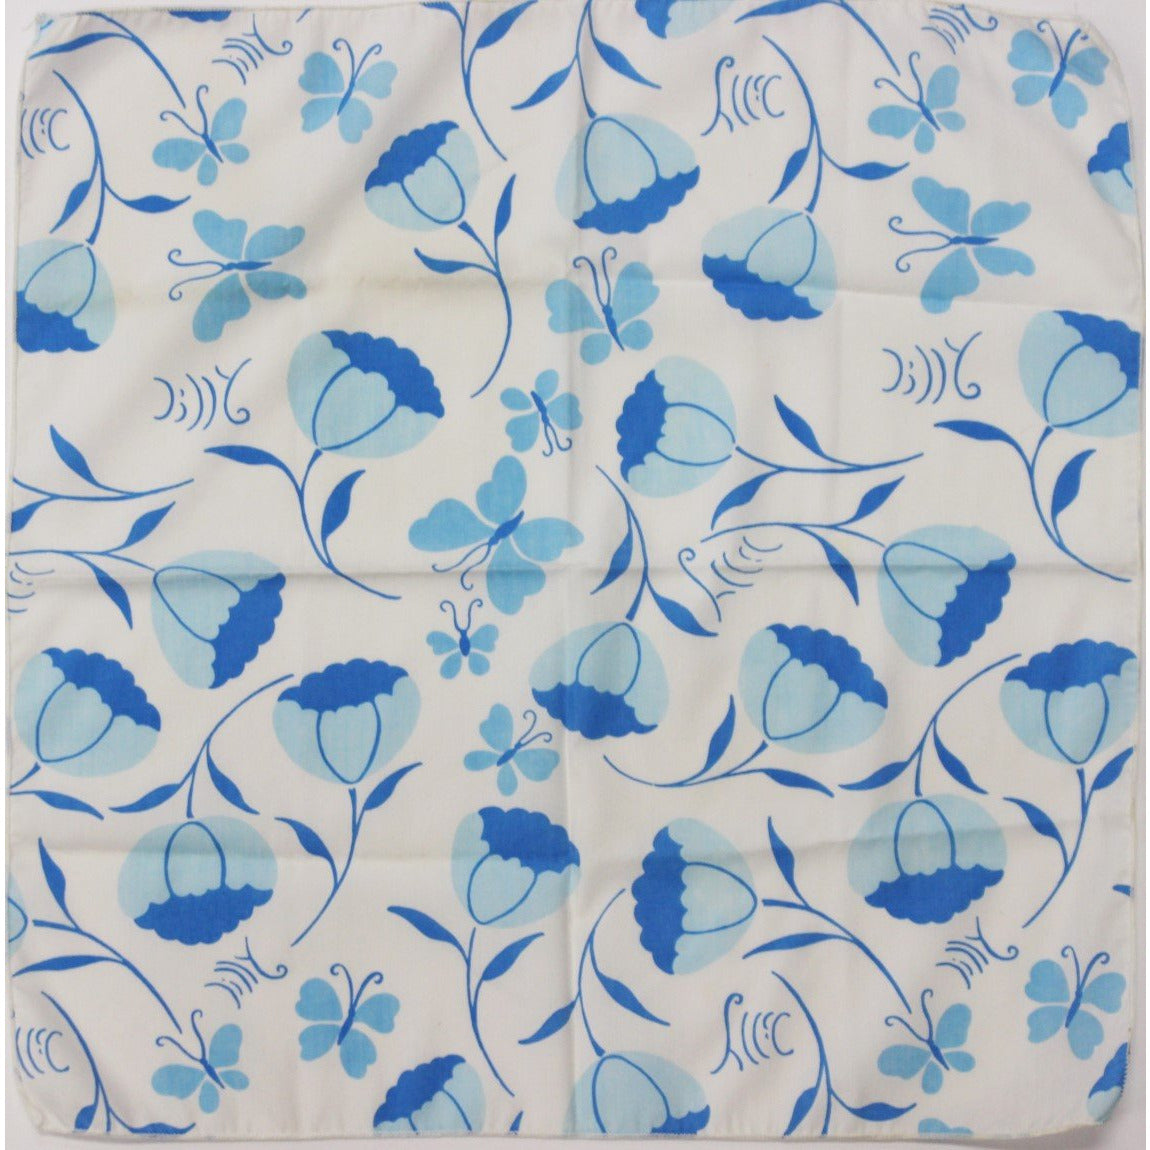 Lilly Pulitzer Blue Tulips Cocktail Napkins